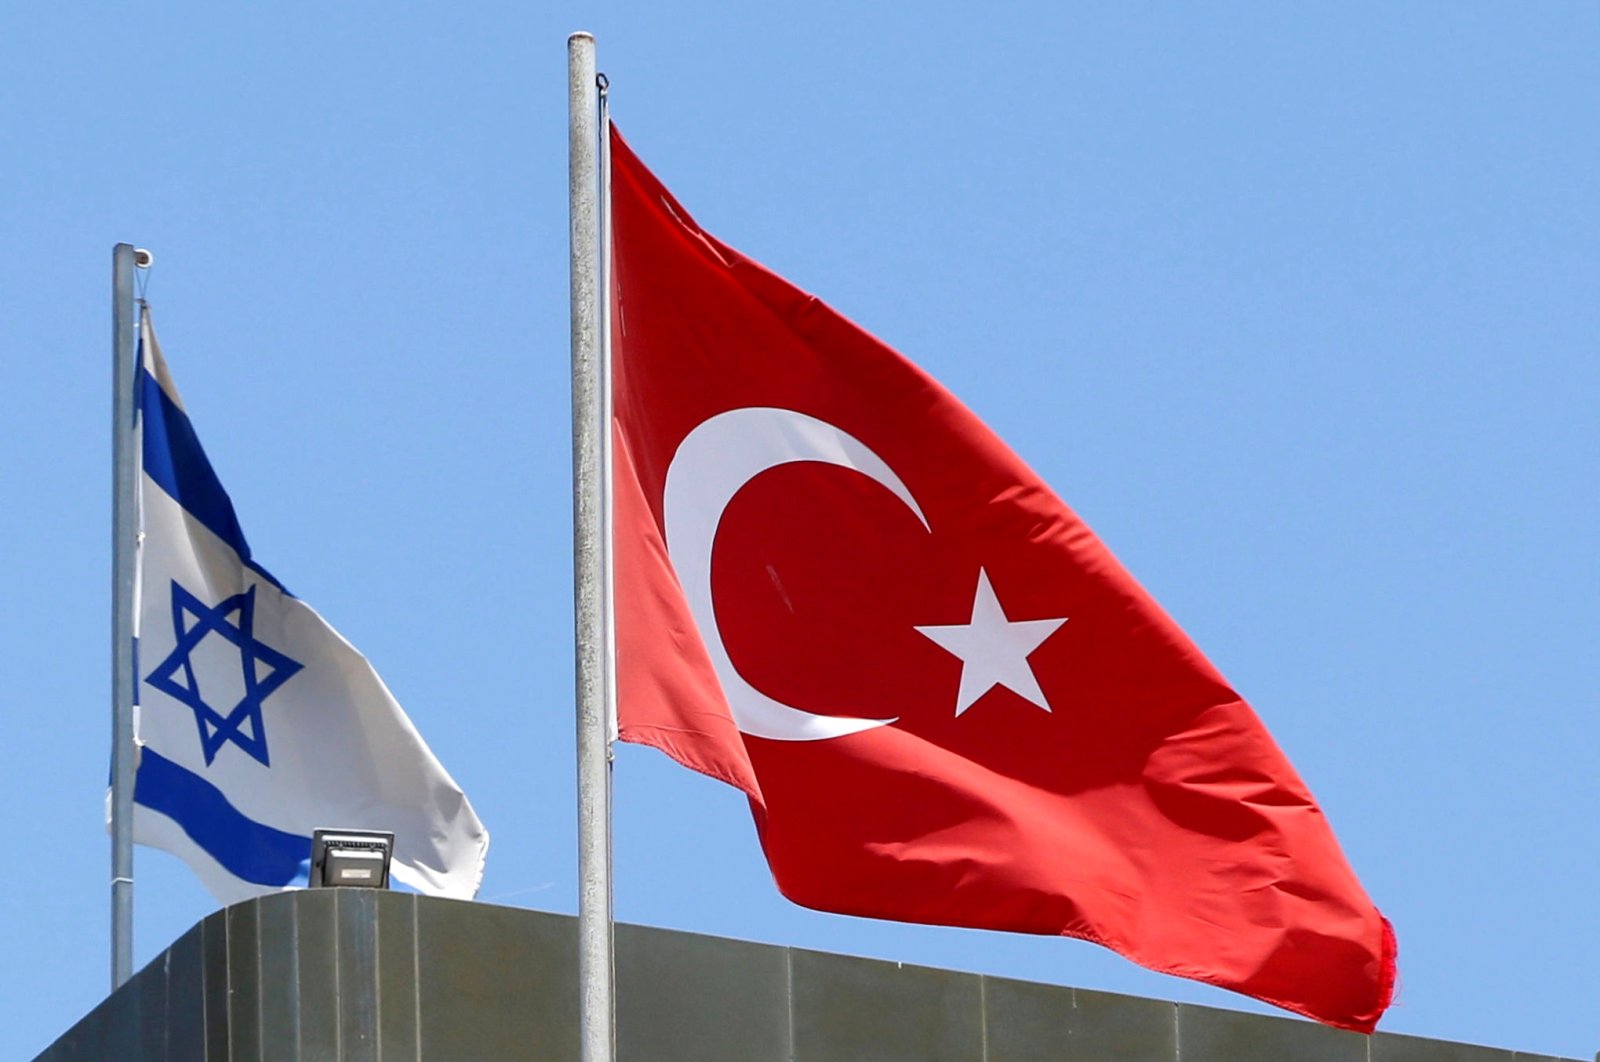 A Turkish flag flutters atop the Turkish Embassy as an Israeli flag is seen nearby, in Tel Aviv, Israel, June 26, 2016. (Reuters File Photo)